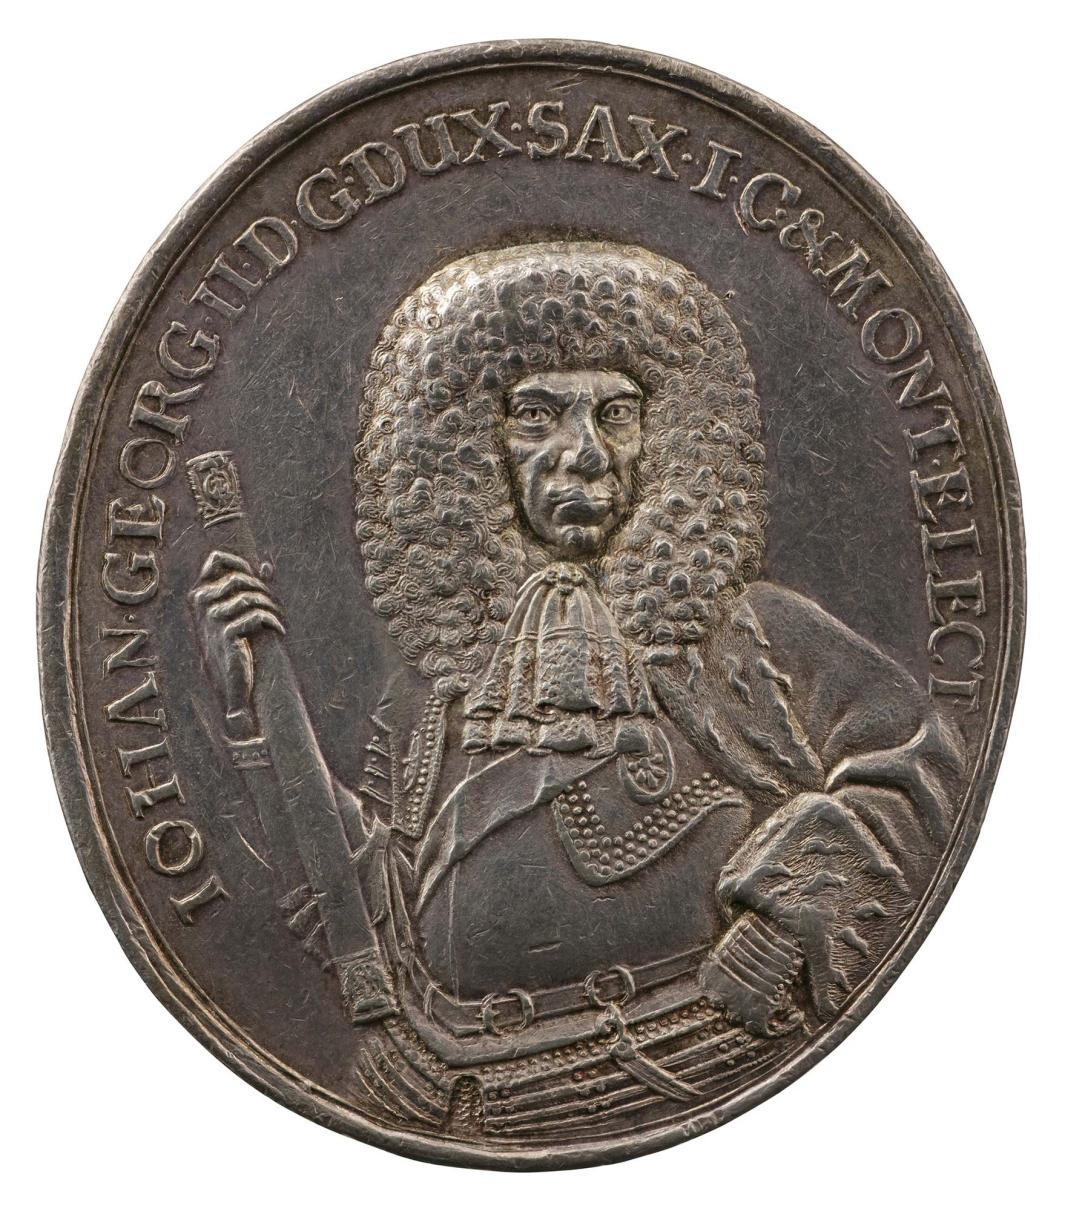 Silver medal of a man wearing armor and holding a baton 